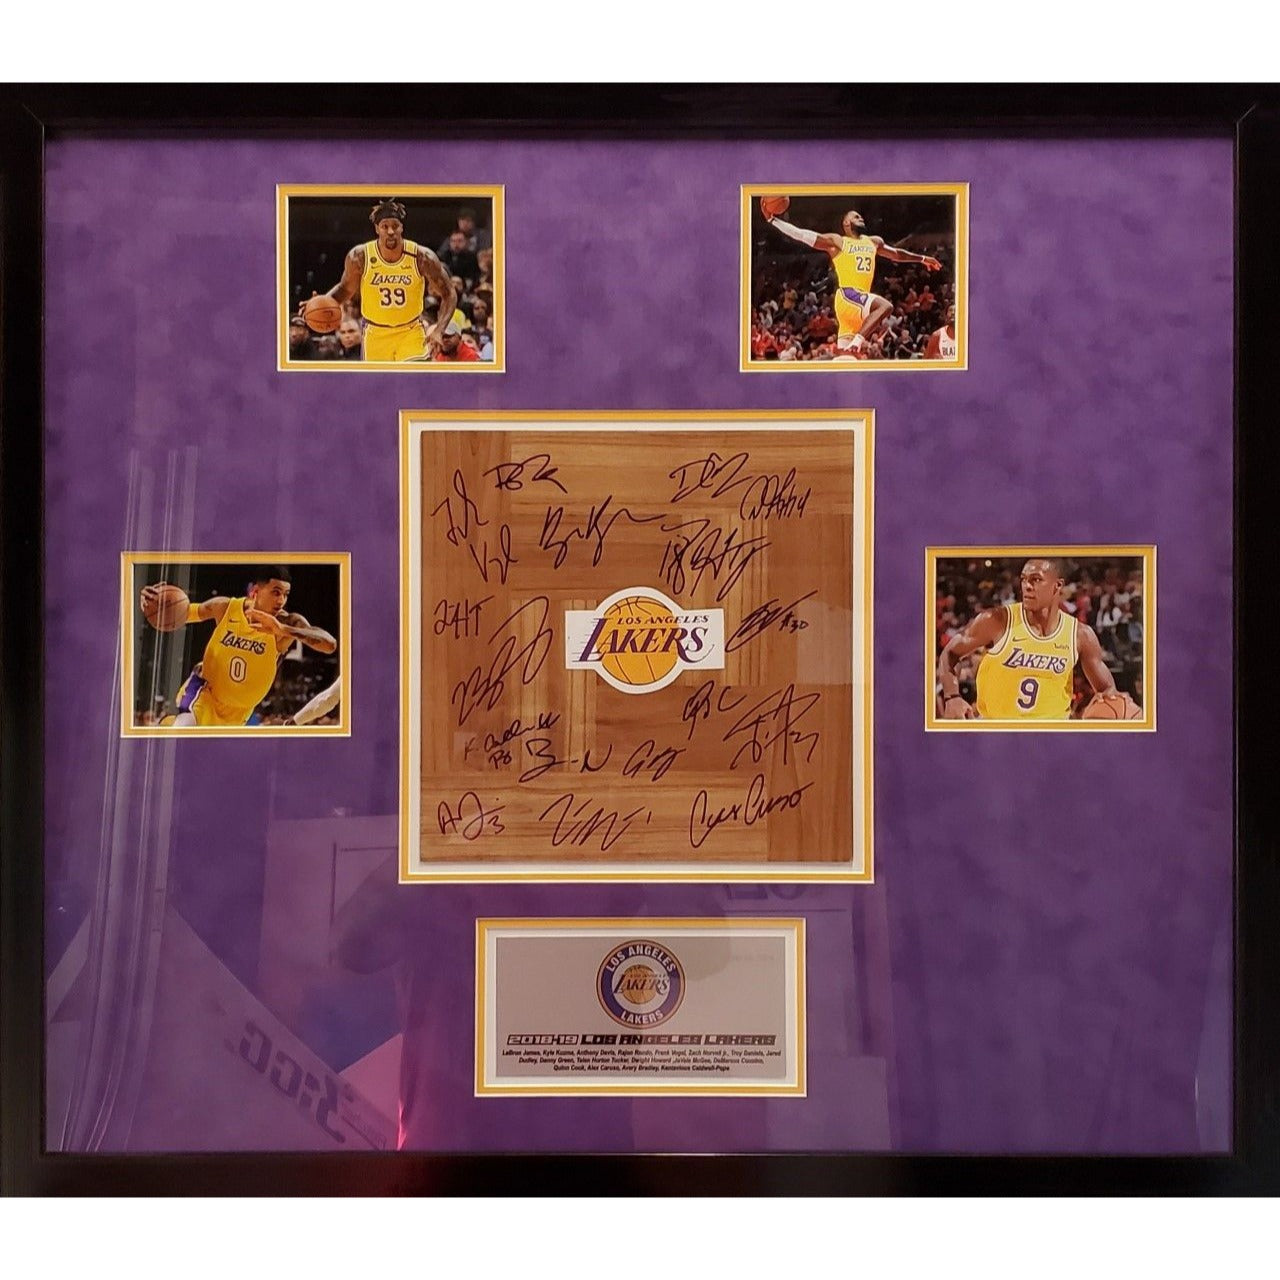 Awesome Artifacts Kobe Bryant, Shaquille O'Neal, Jerry Bus Jerry West 2019-20 Los Angeles Lakers Team Signed Shooting Shirt with Proof by Awesome Artifact